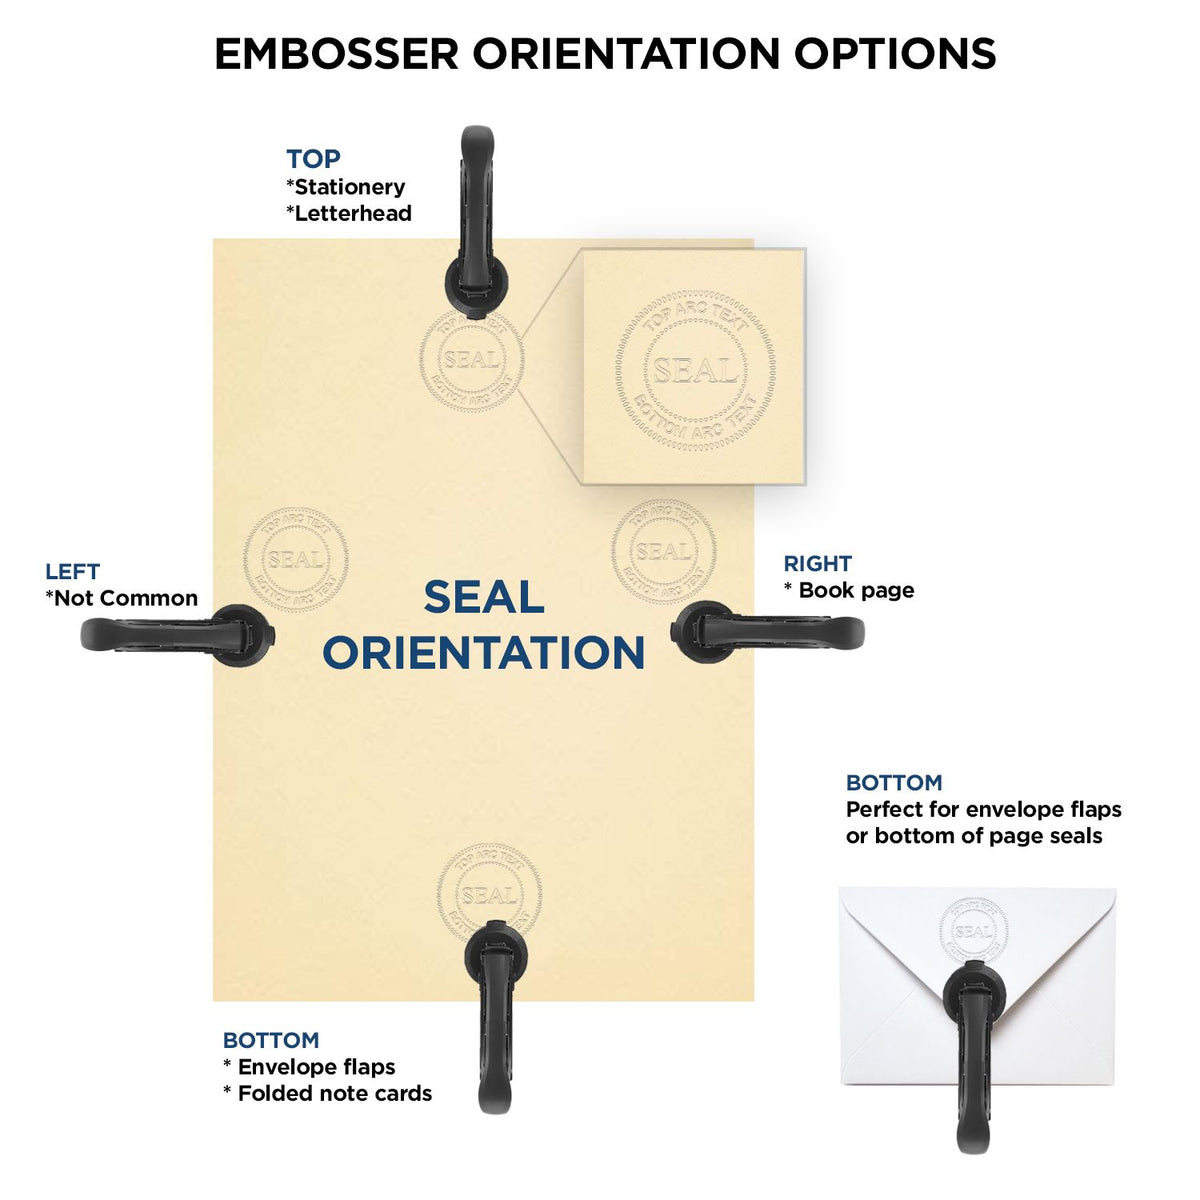 An infographic for the Missouri Geologist Desk Seal showing embosser orientation, this is showing examples of a top, bottom, right and left insert.